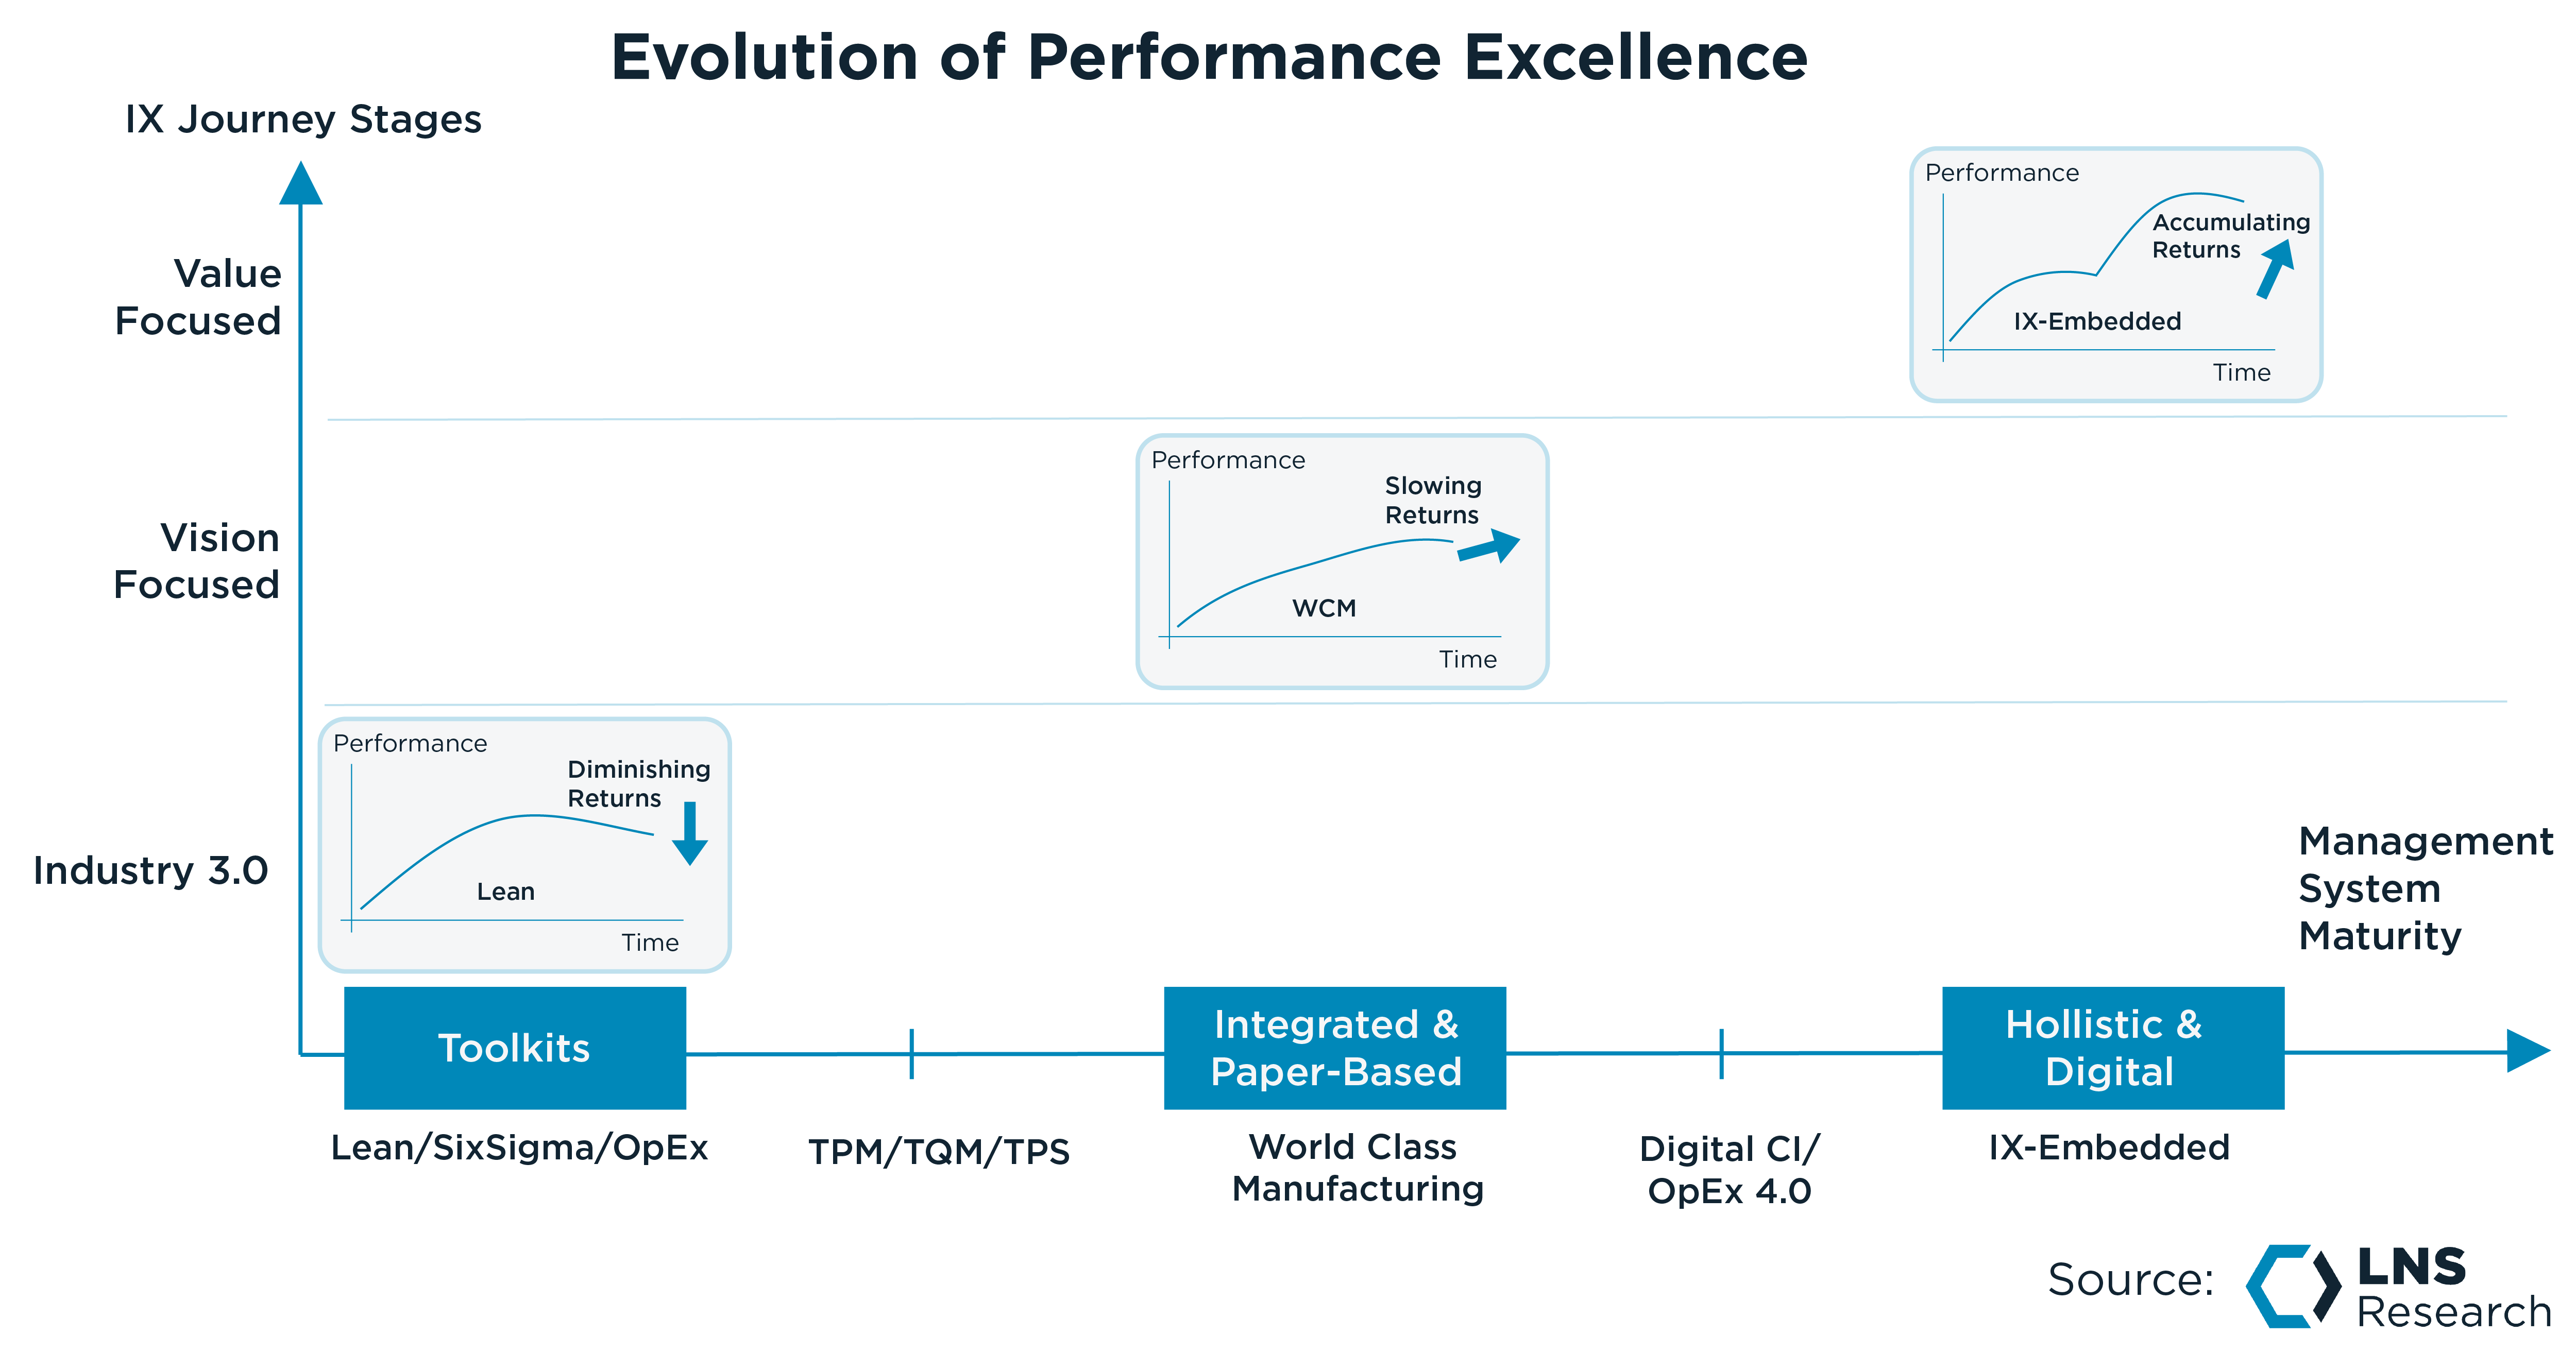 Evolution of Performance Excellence